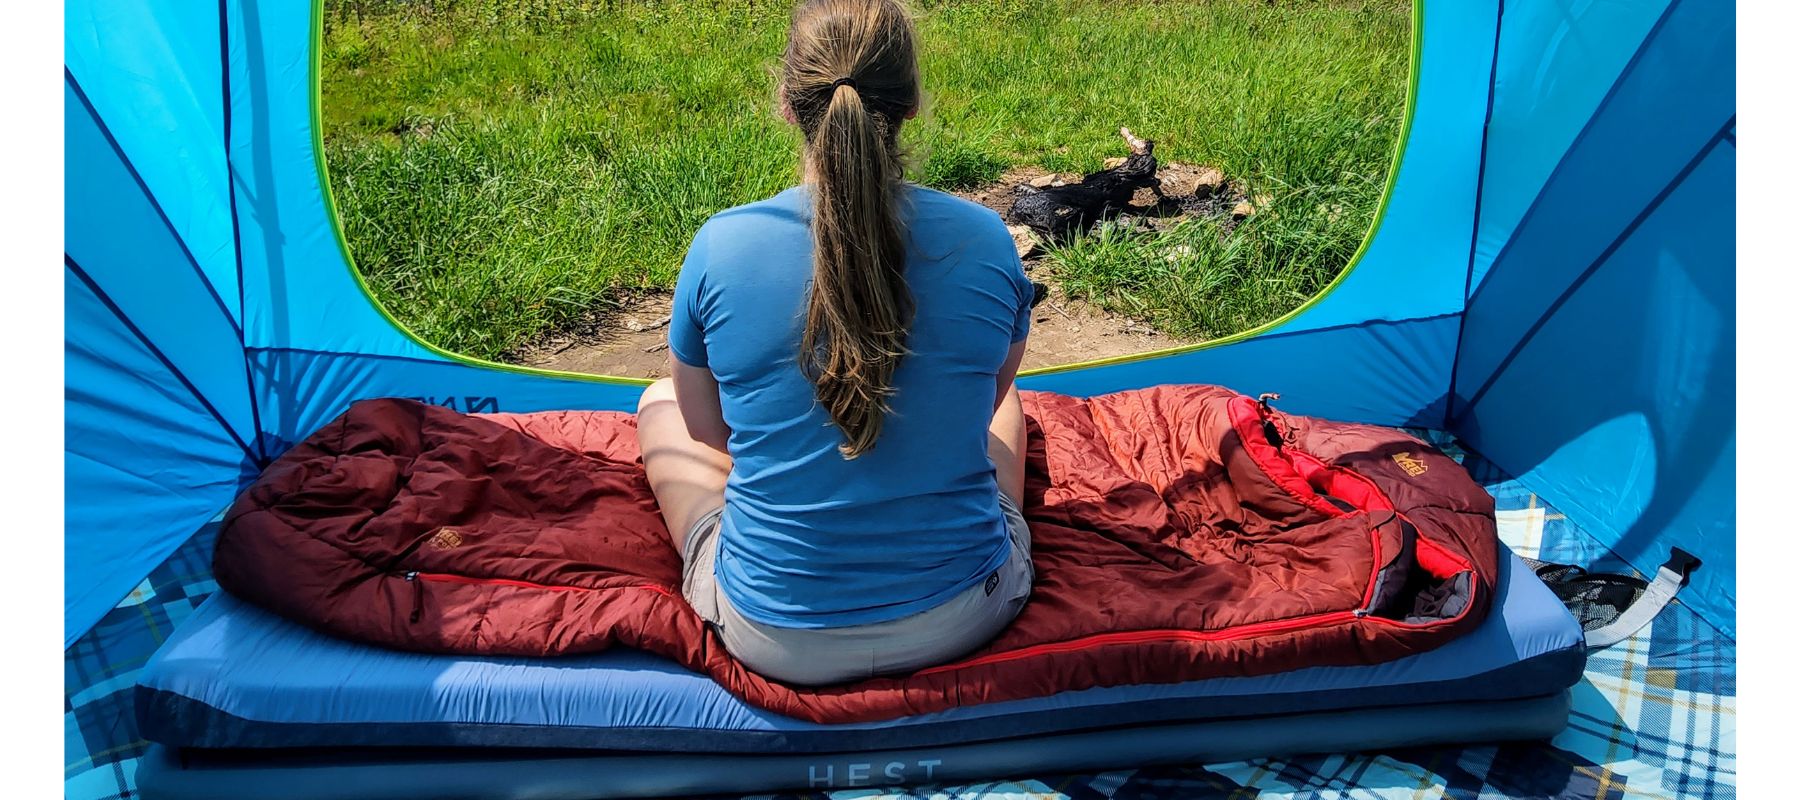 photo of someone sitting on HEST Sleep System in tent overlooking green pasture while camping